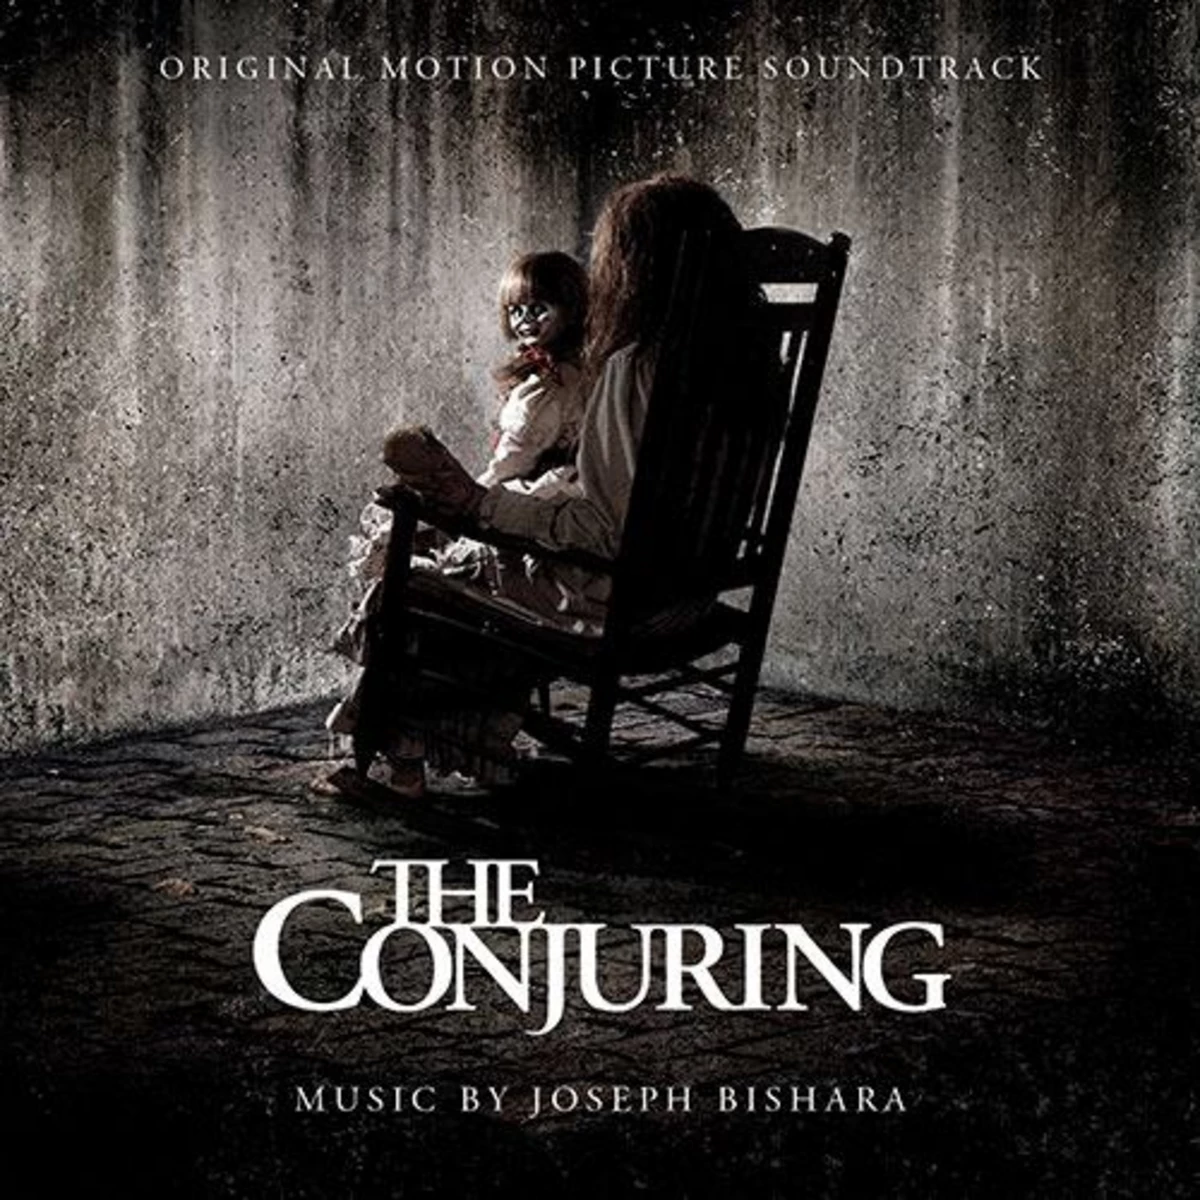 conjuring 1 movie review